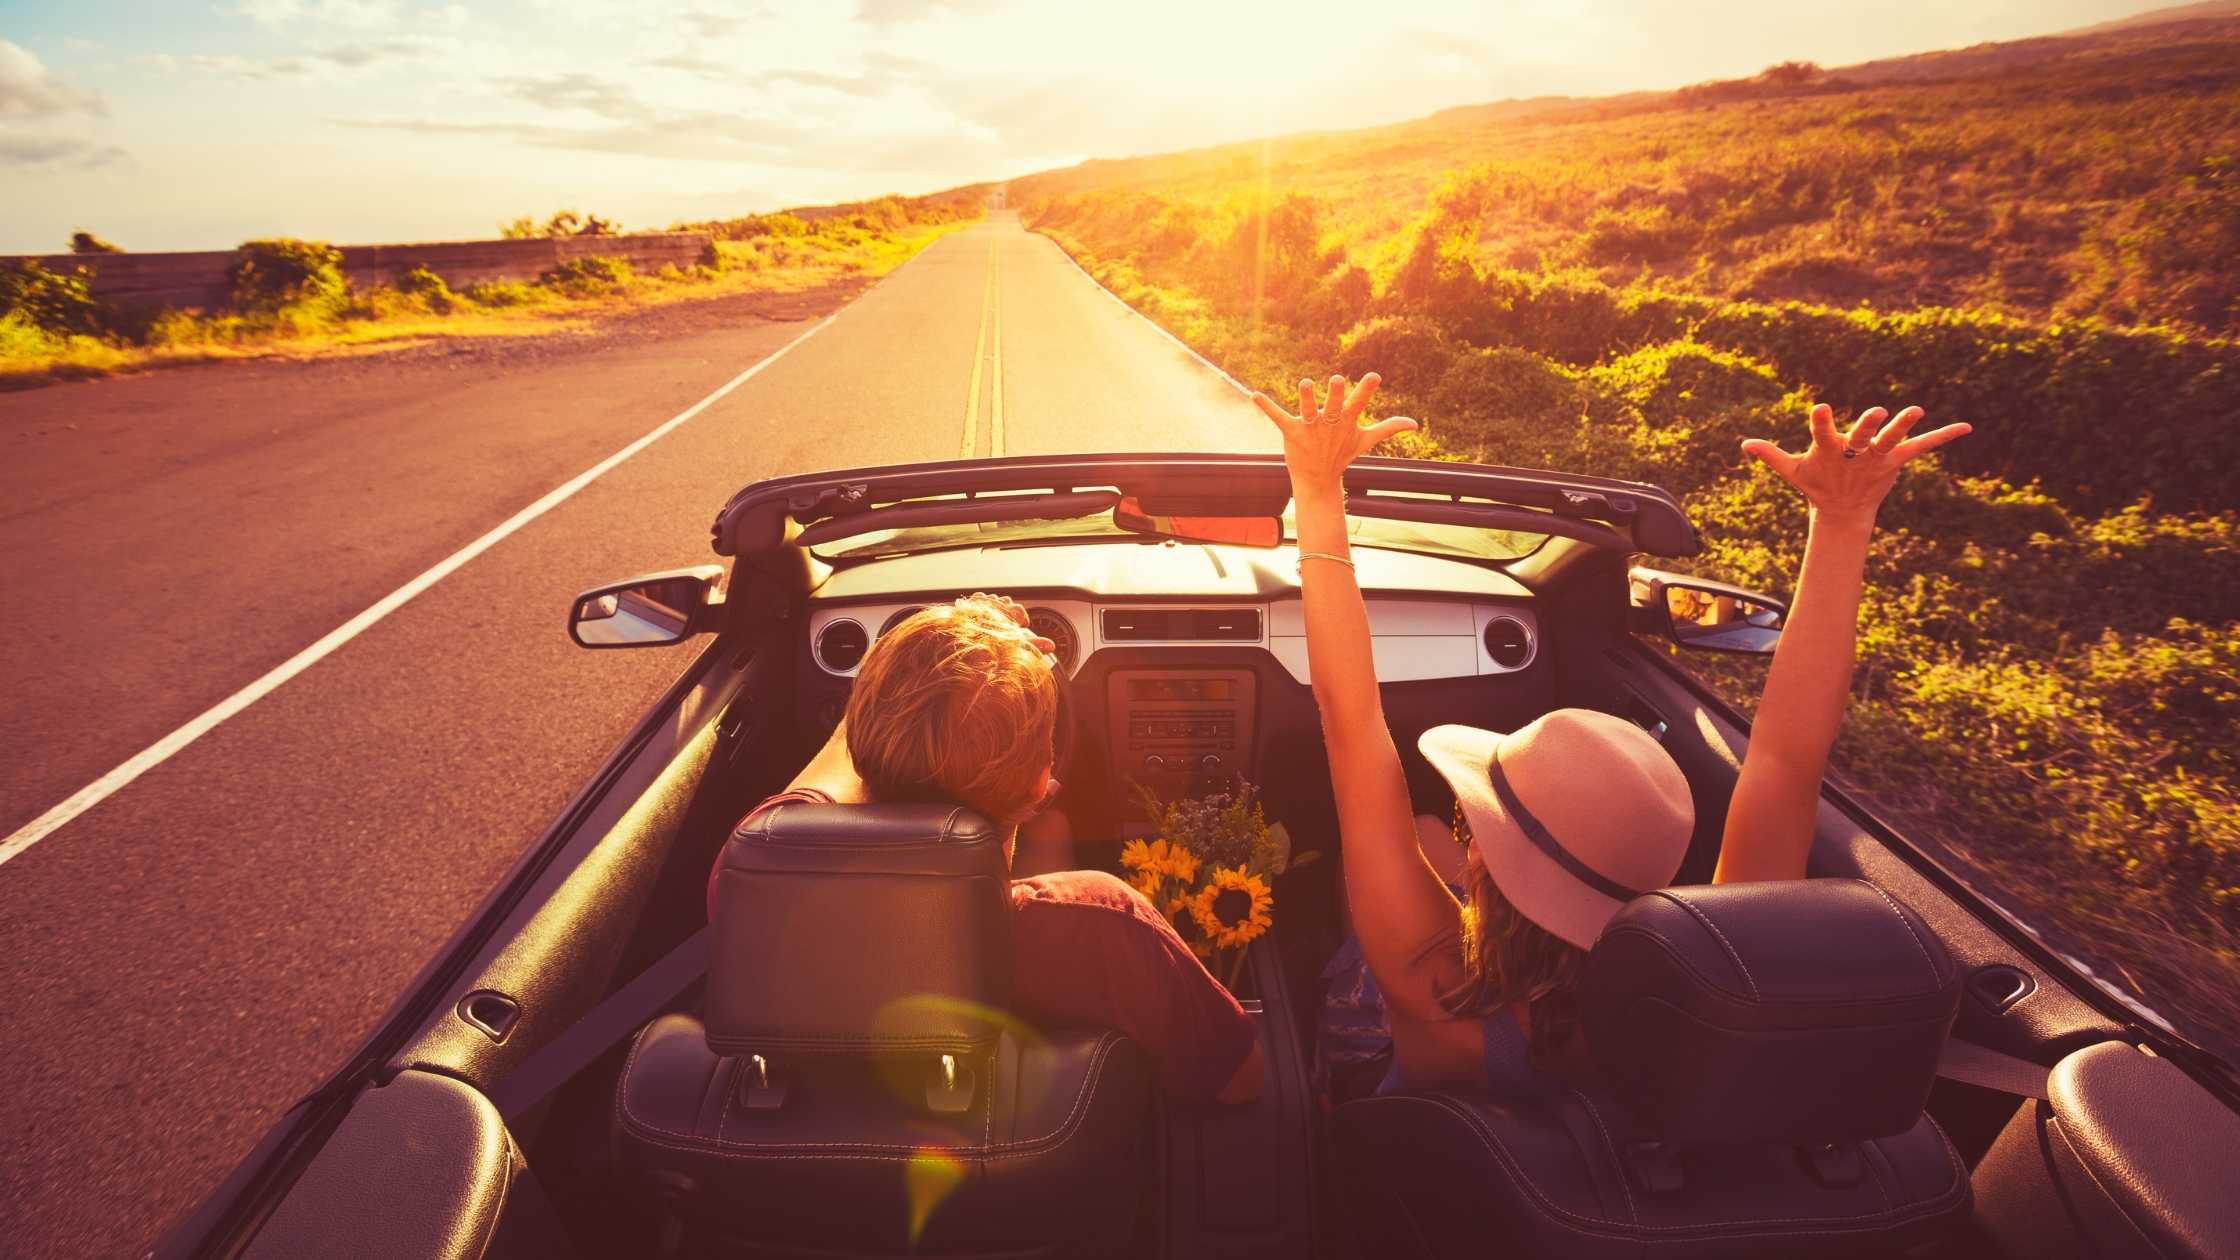 People in a car driving into the sunset. Online therapy in Virginia can help you heal. Get support with an online therapist for anxiety, stress, depression, trauma and more.